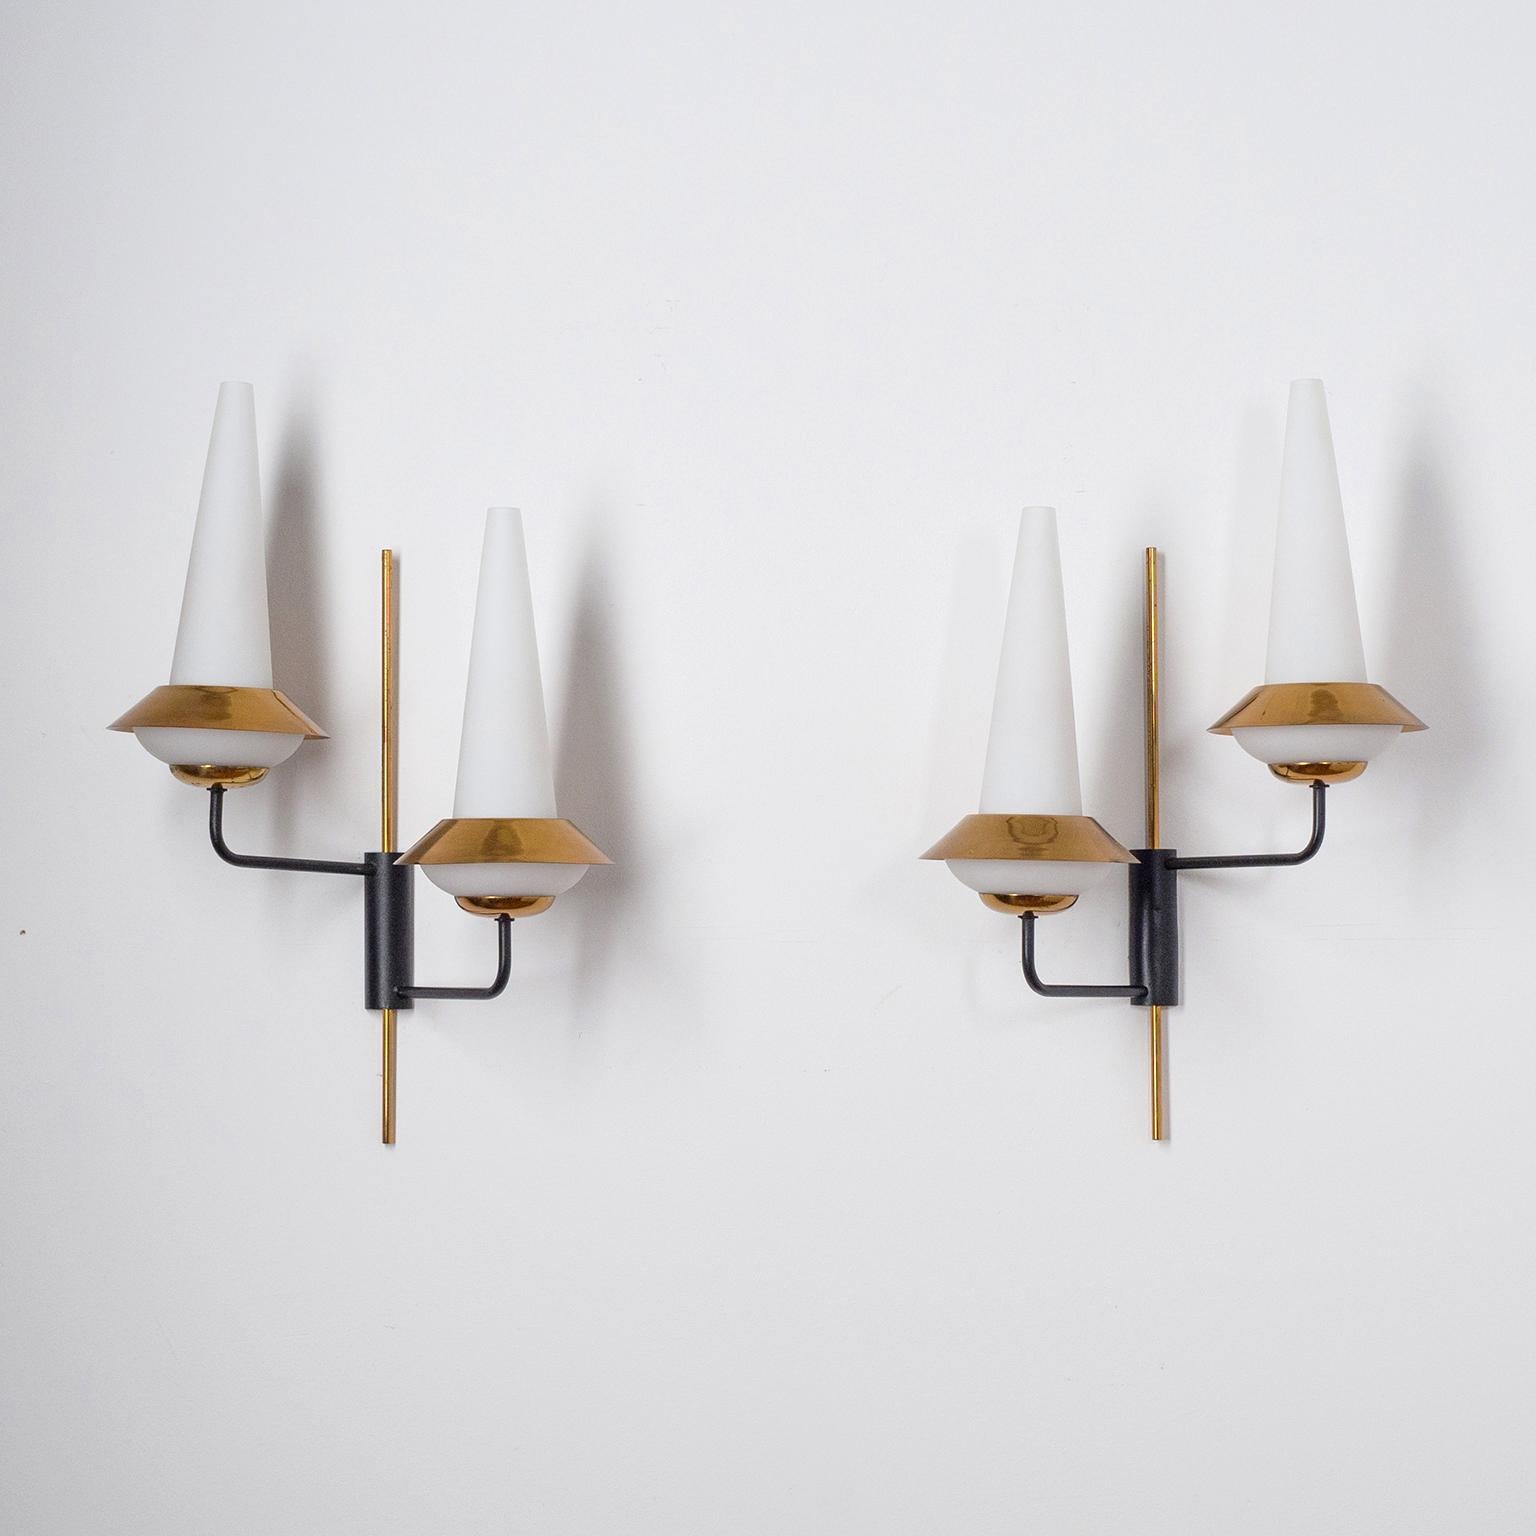 Rare pair of French two-arm wall lights from the 1950-1960s. A Minimalist brass and lacquered structure with two satin glass diffusers and polished brass shades. Brass and ceramic E14 sockets with new wiring. Priced and sold as a pair.